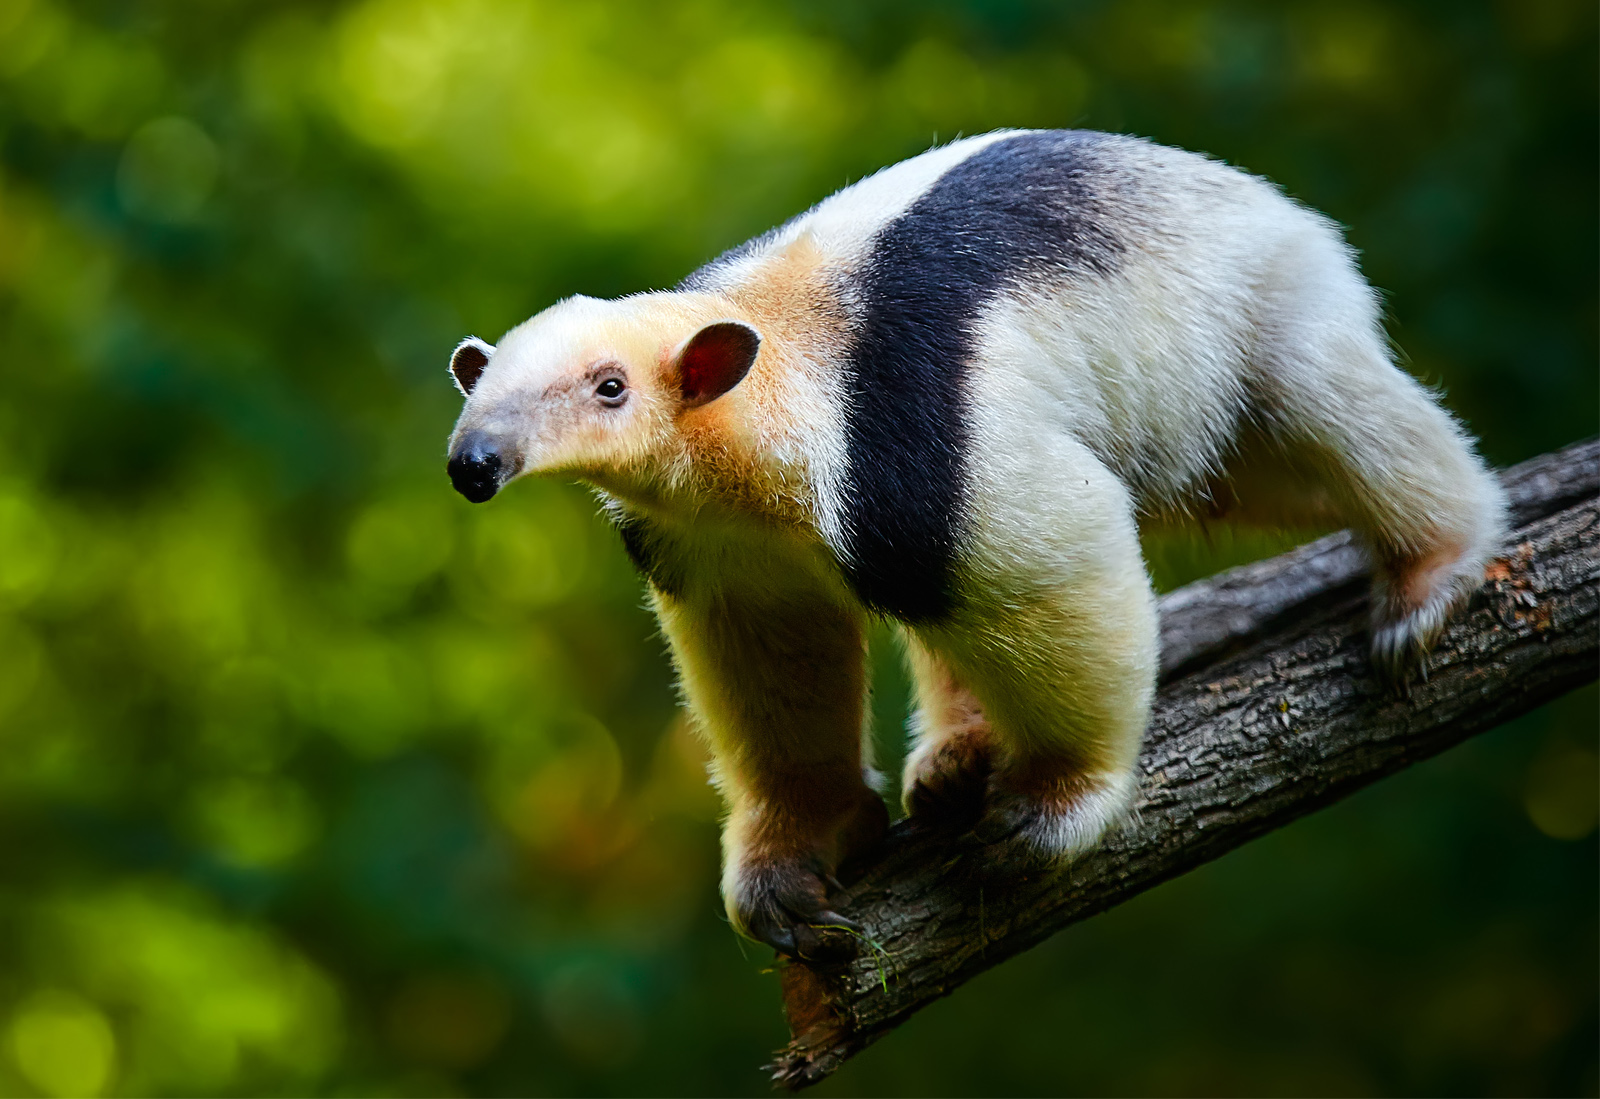 Half the Population Can’t Pass This Random Trivia Quiz, And I Doubt You Can Either Southern Tamandua Tamandua Tetradactyla In Brazil Rain Forest.